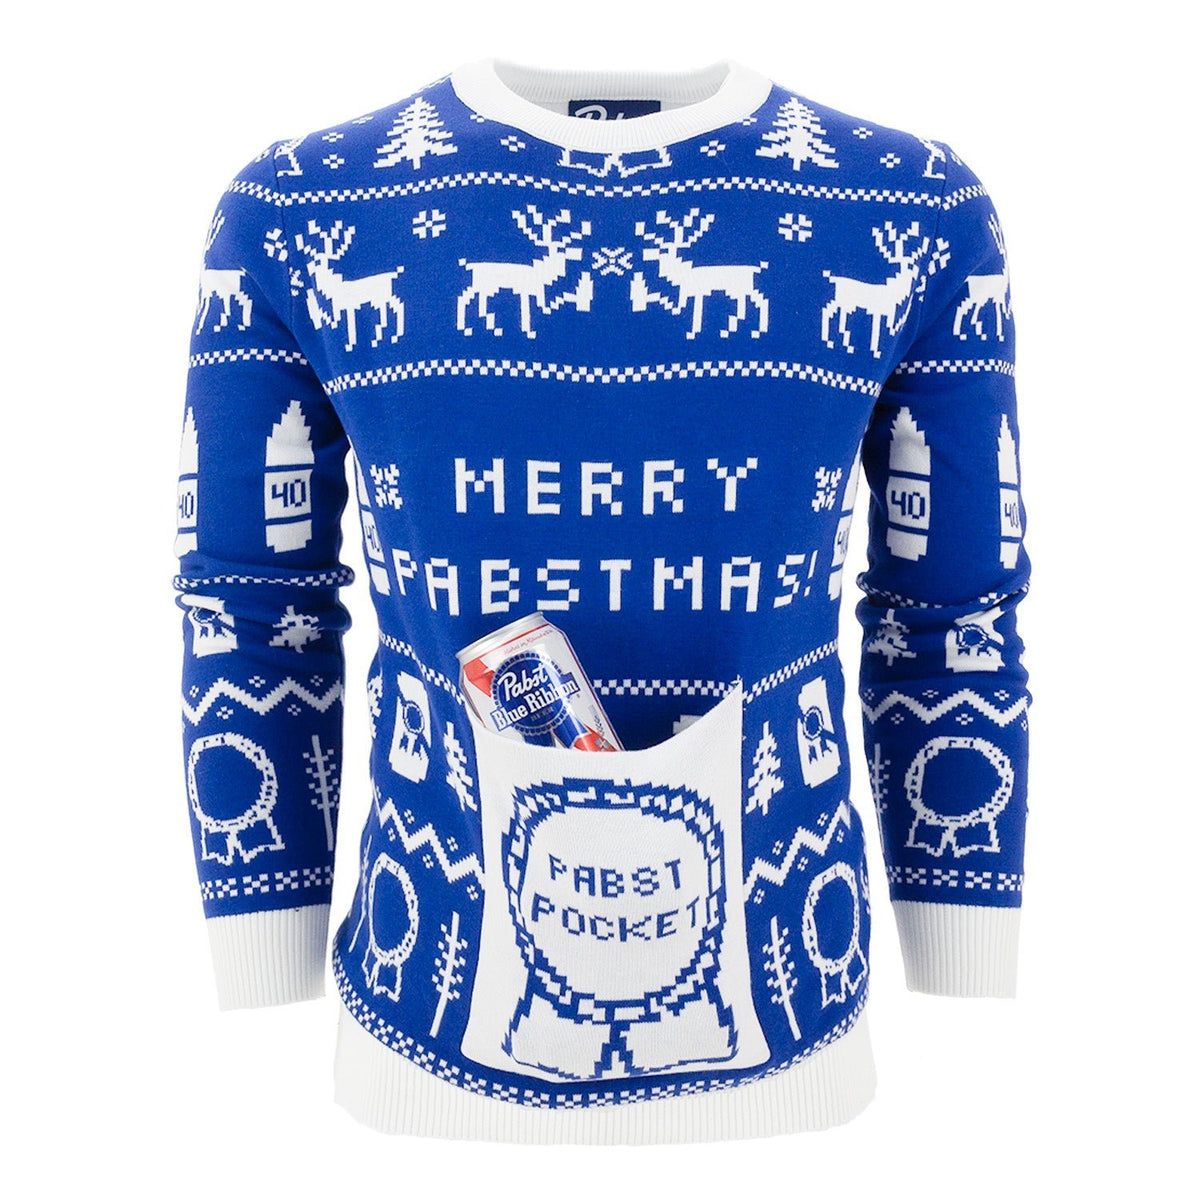 Pabst Blue Ribbon Grinch Ugly Sweater - Nouvette